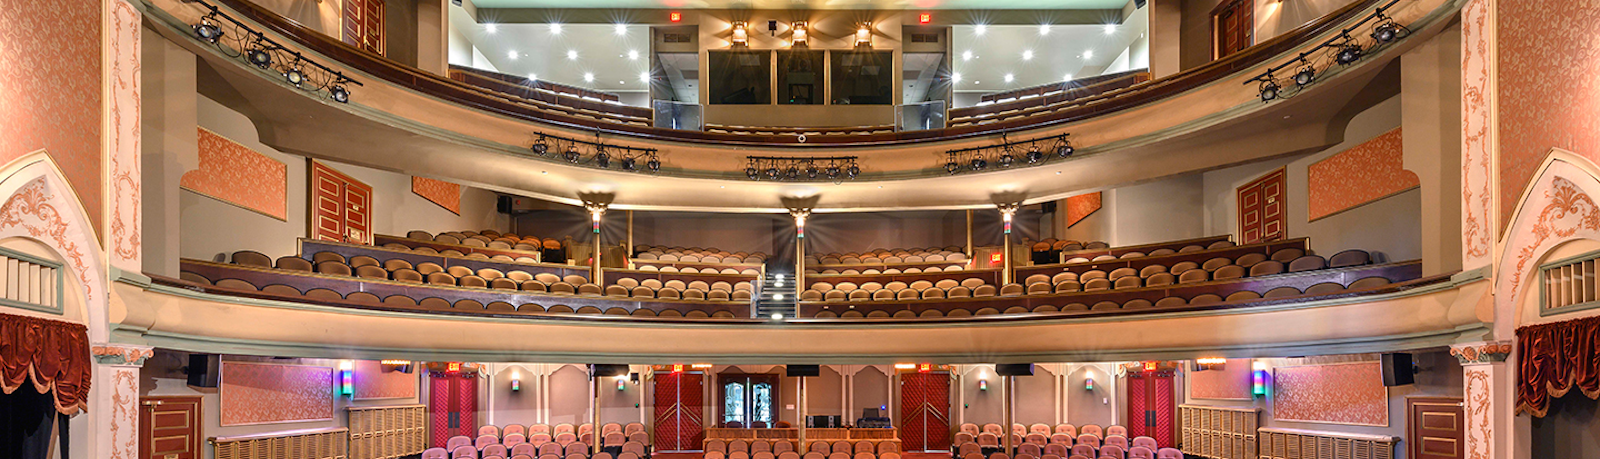 The fully renovated historic Eagles Theatre in Wabash reopened in Feb. 2020, just before the COVID-19 pandemic began.